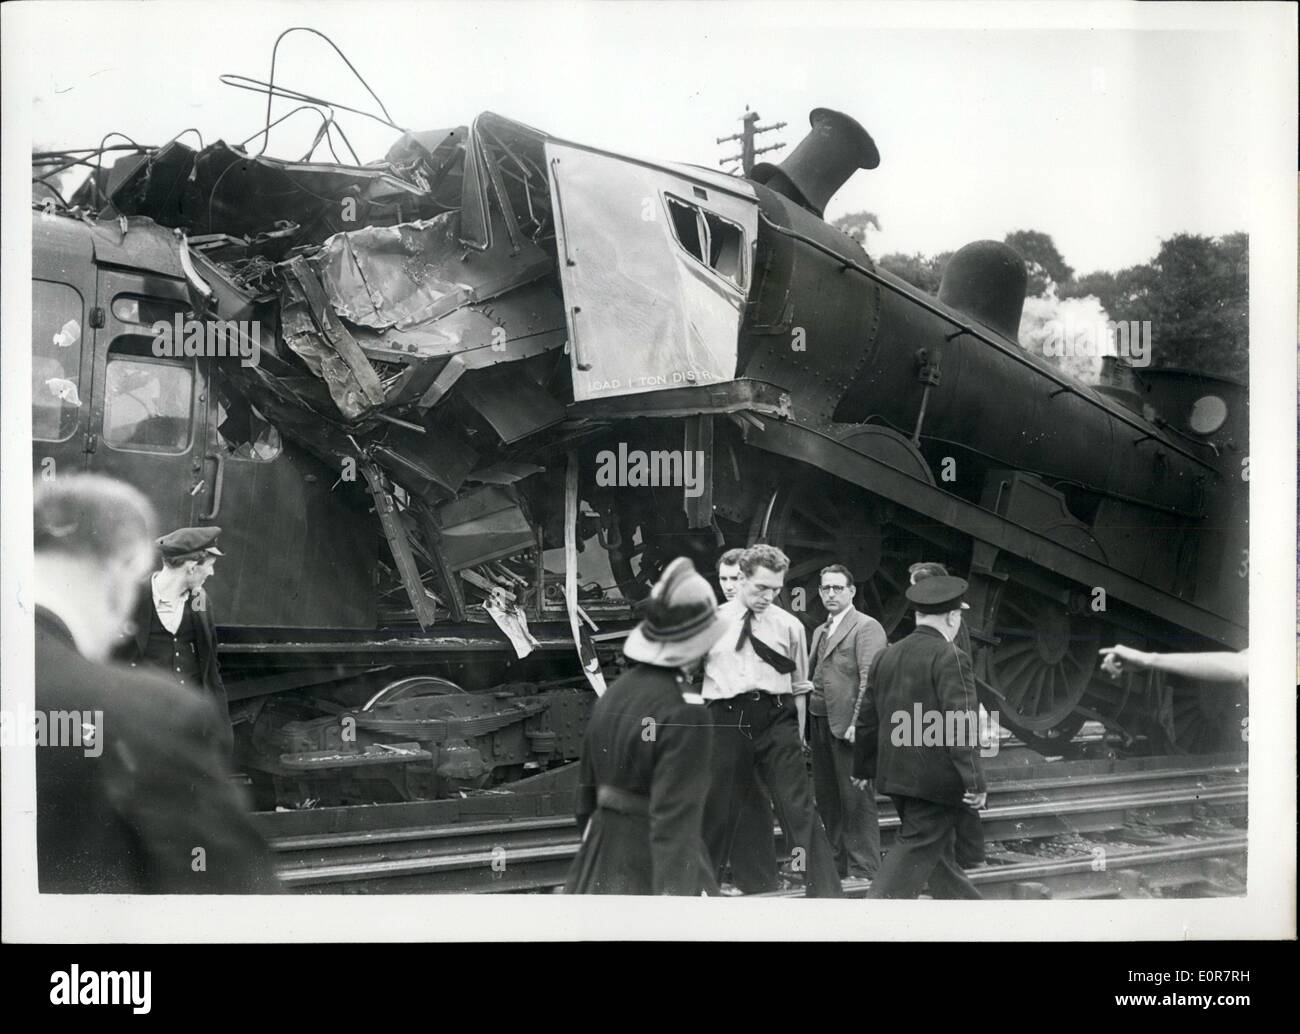 Jul. 07, 1958 - Many Injured In London Train Crash: Between twenty and thirty people have been injured this morning in a collision between a steam train and an electric train at Maze Hill railway station, Greenwich. Photo shows The engine of the steam train perched on top of the smashed electric train - at Maze Hill today. Stock Photo